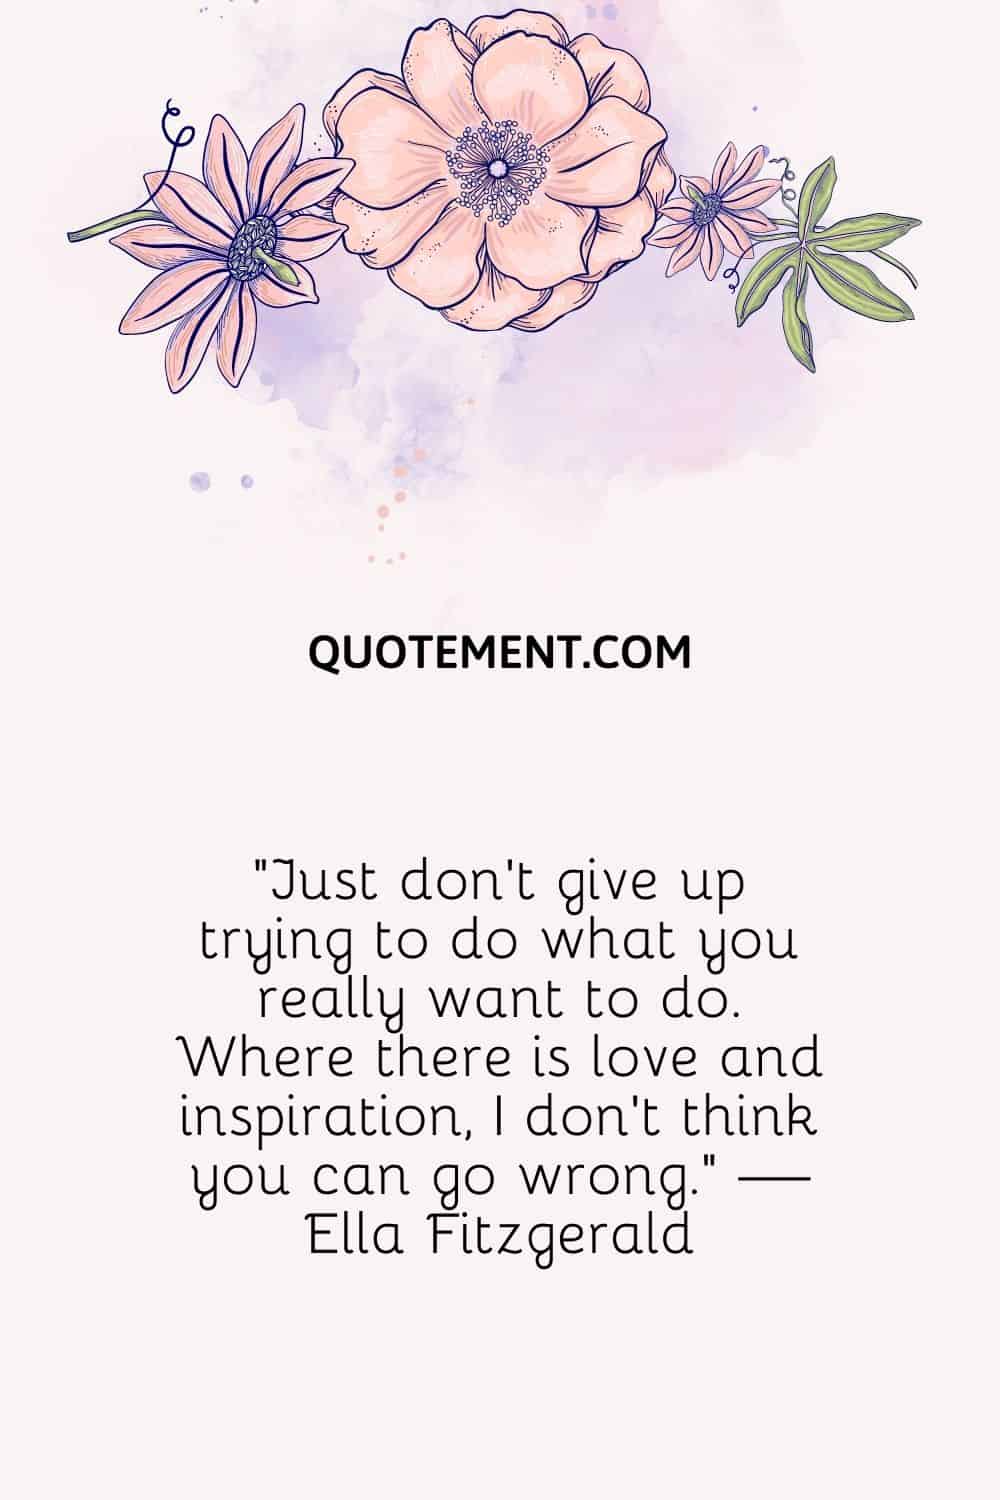 Just don't give up trying to do what you really want to do. Where there is love and inspiration, I don't think you can go wrong. — Ella Fitzgerald